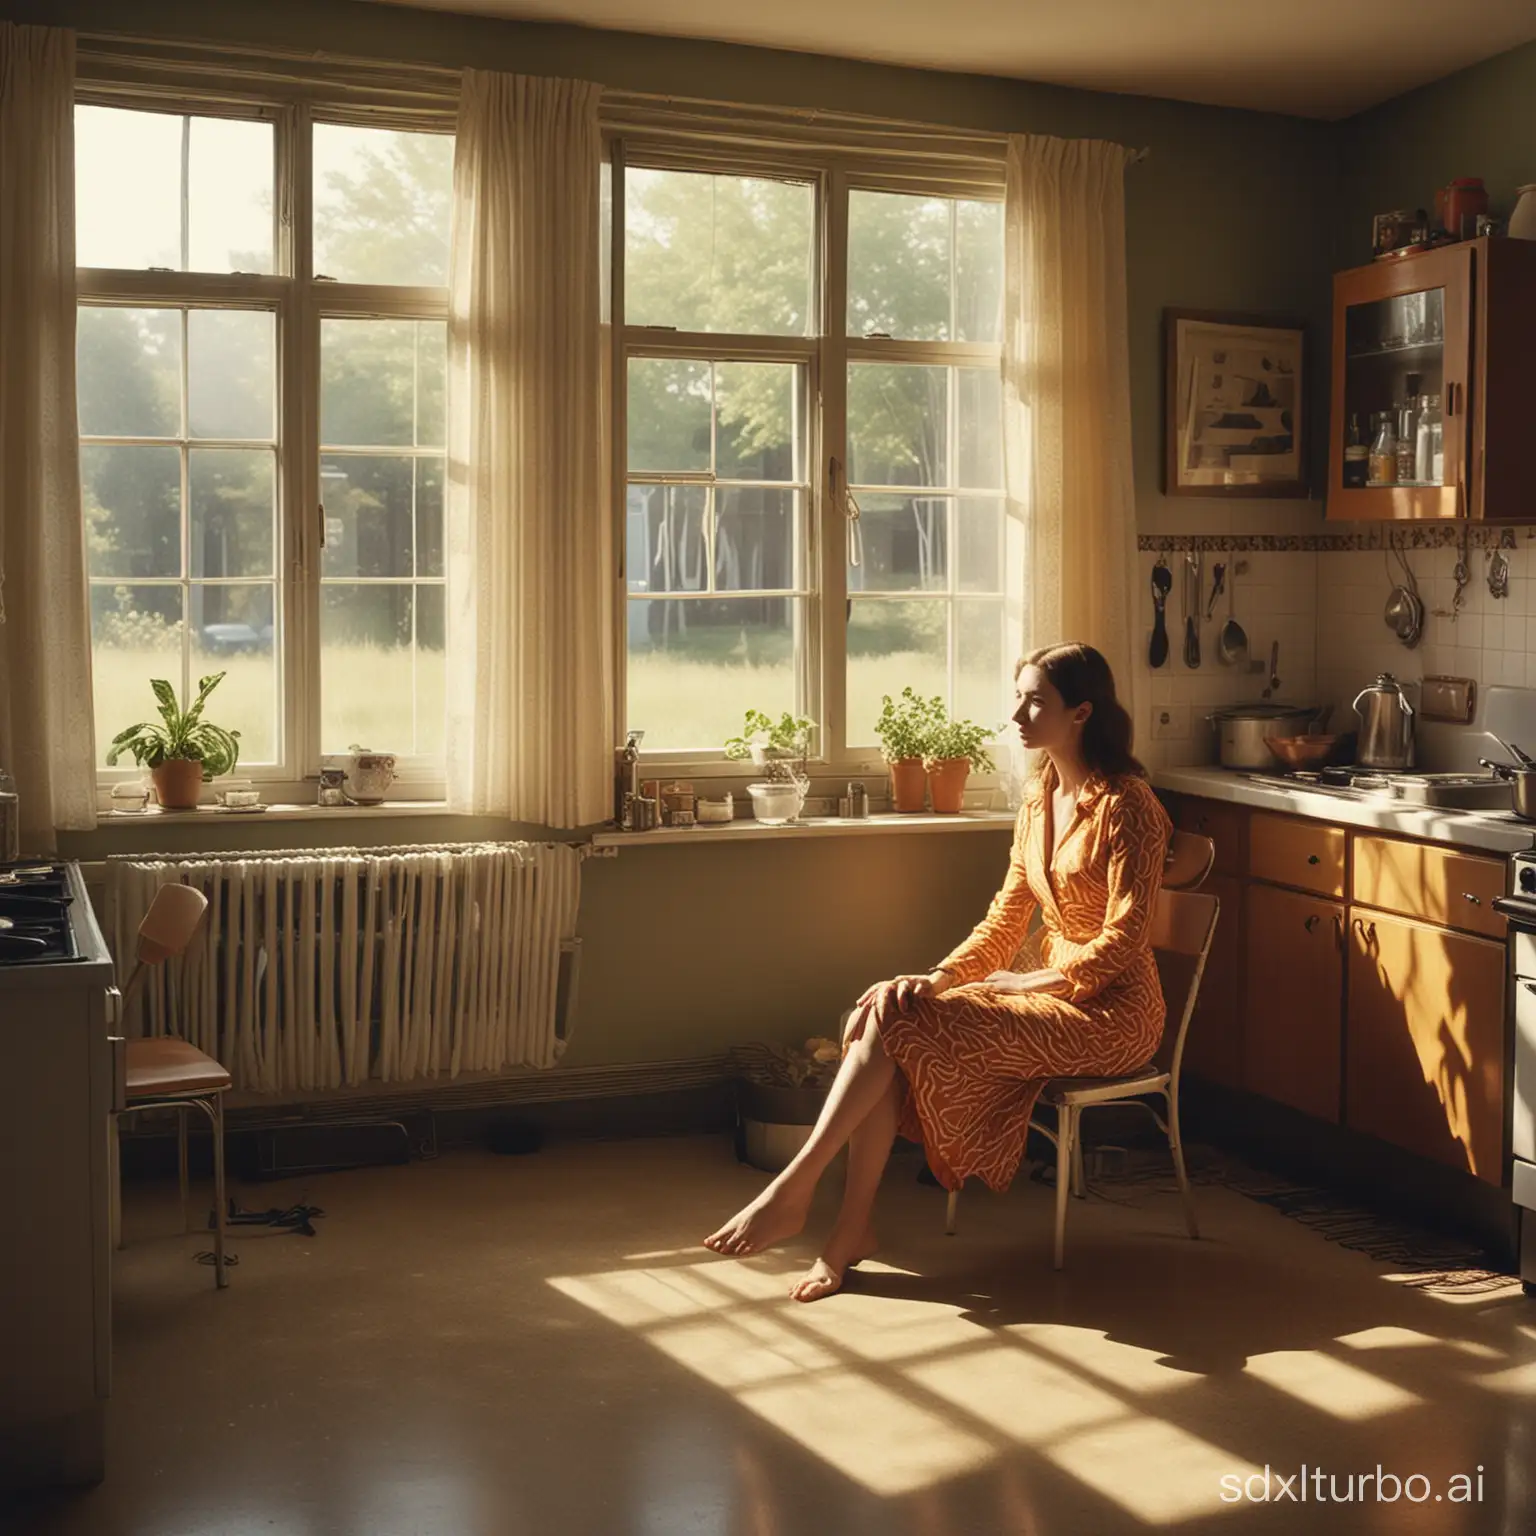 A young woman dressed in 1970s clothing is sitting In a kitchen furnished in the style of the 1970s, light enters through a side window. In the kitchen is a tame zebra. Style of gregory crewdson